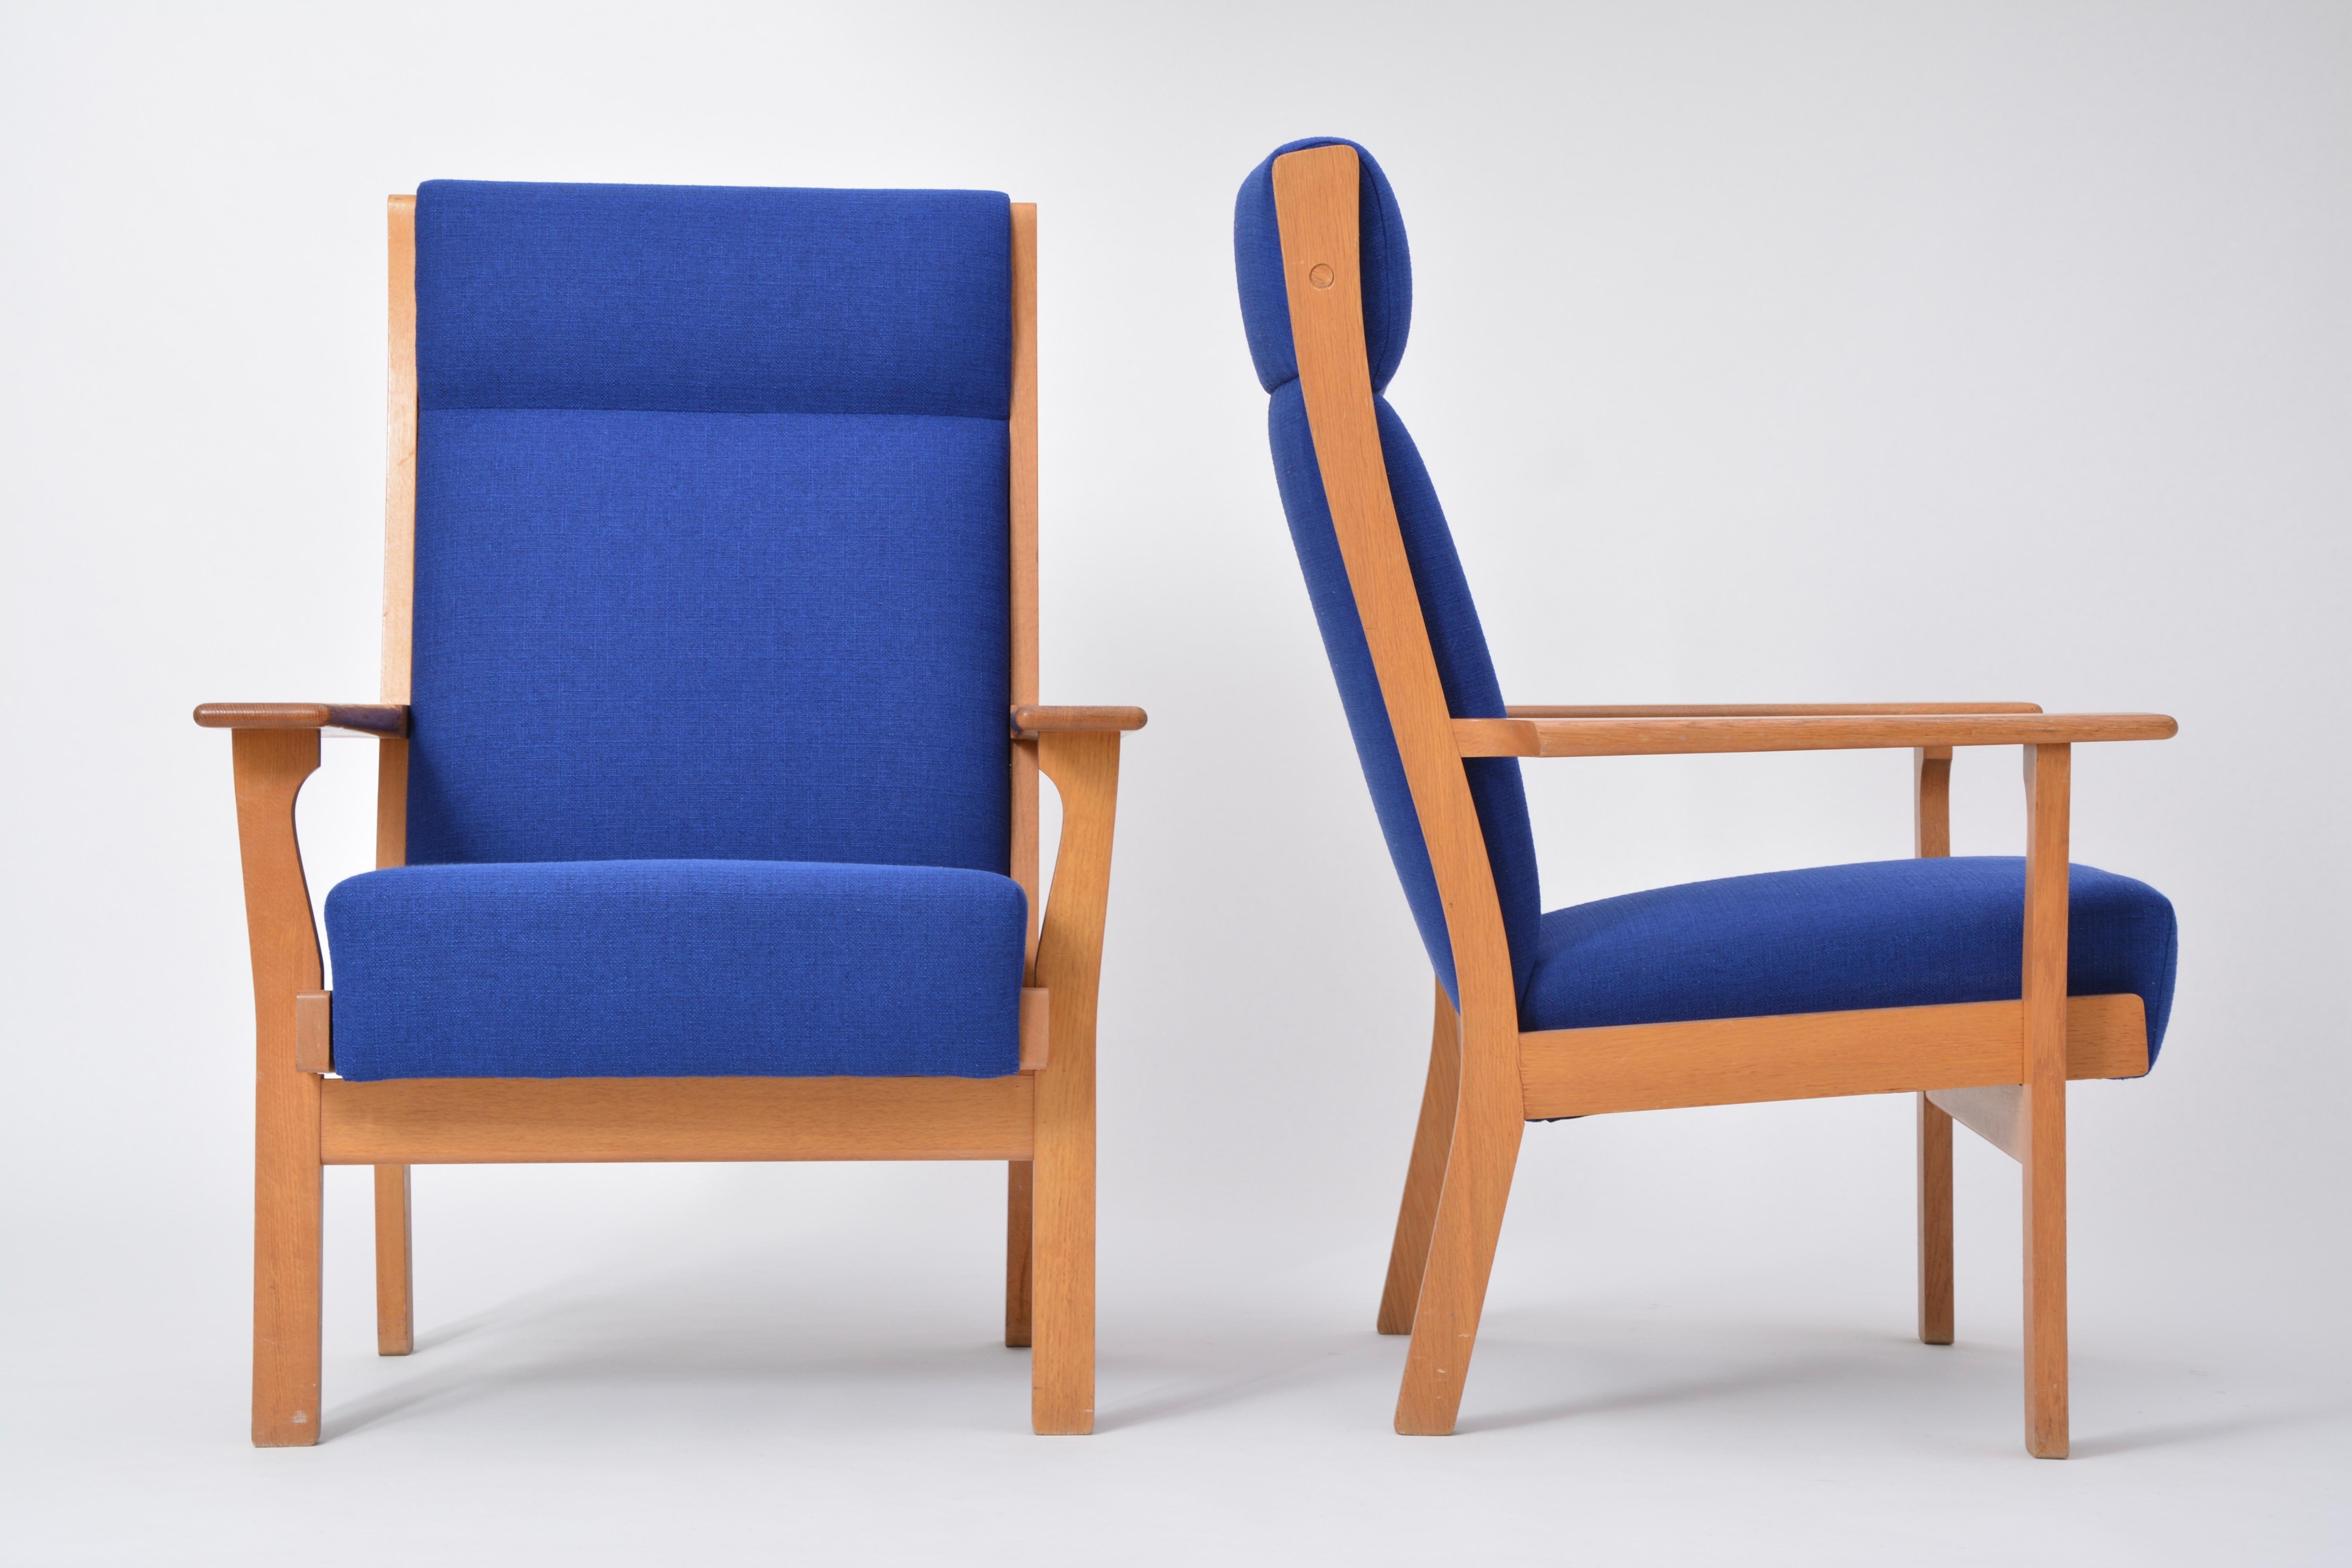 20th Century Set of Two Danish Mid-Century Modern GE 181 A chairs by Hans Wegner for GETAMA